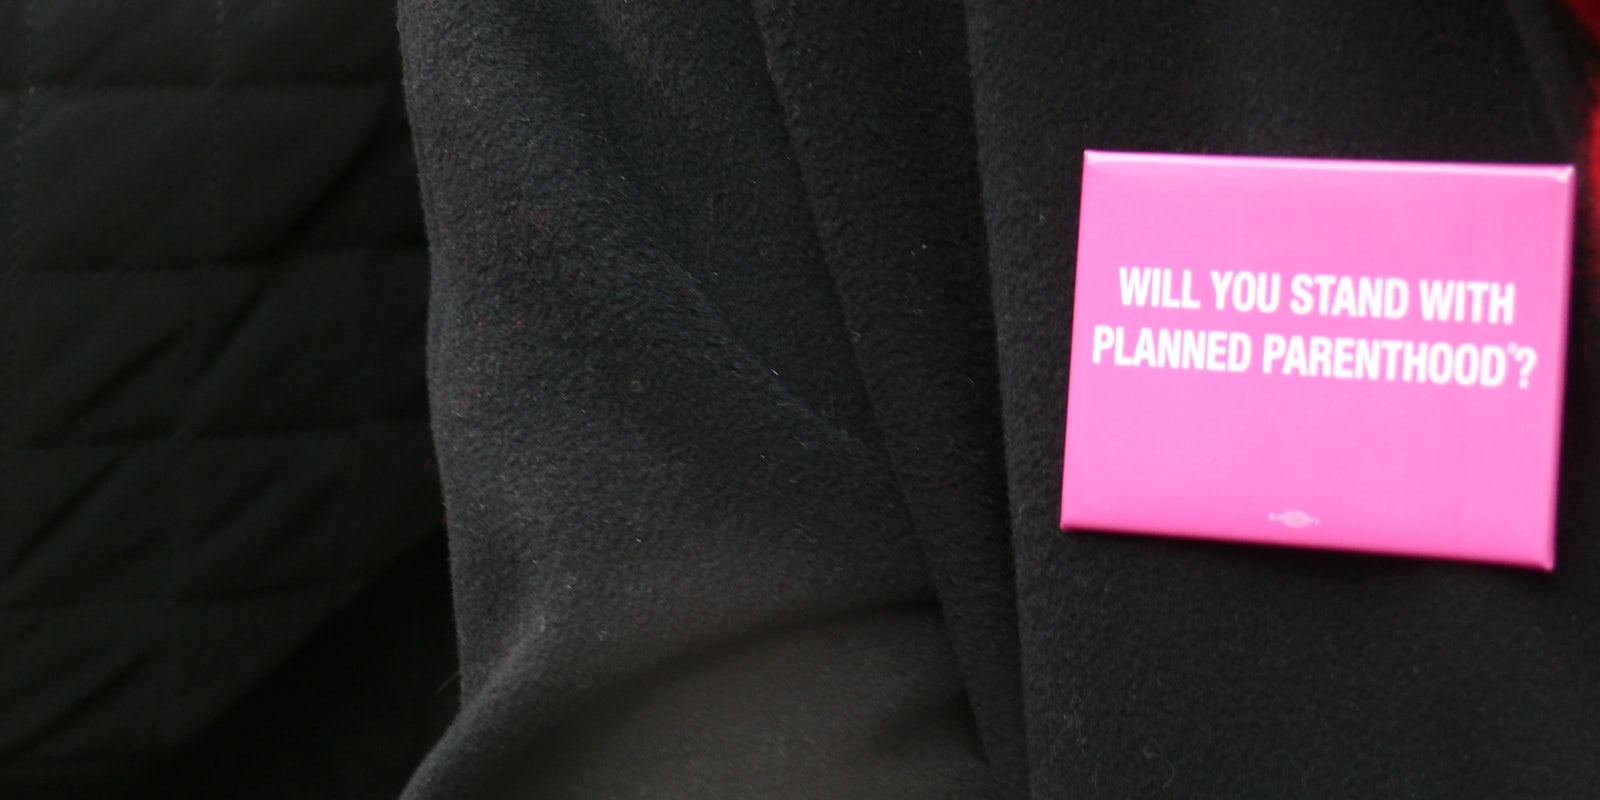 planned parenthood federal funding: A stand with planned parenthood button